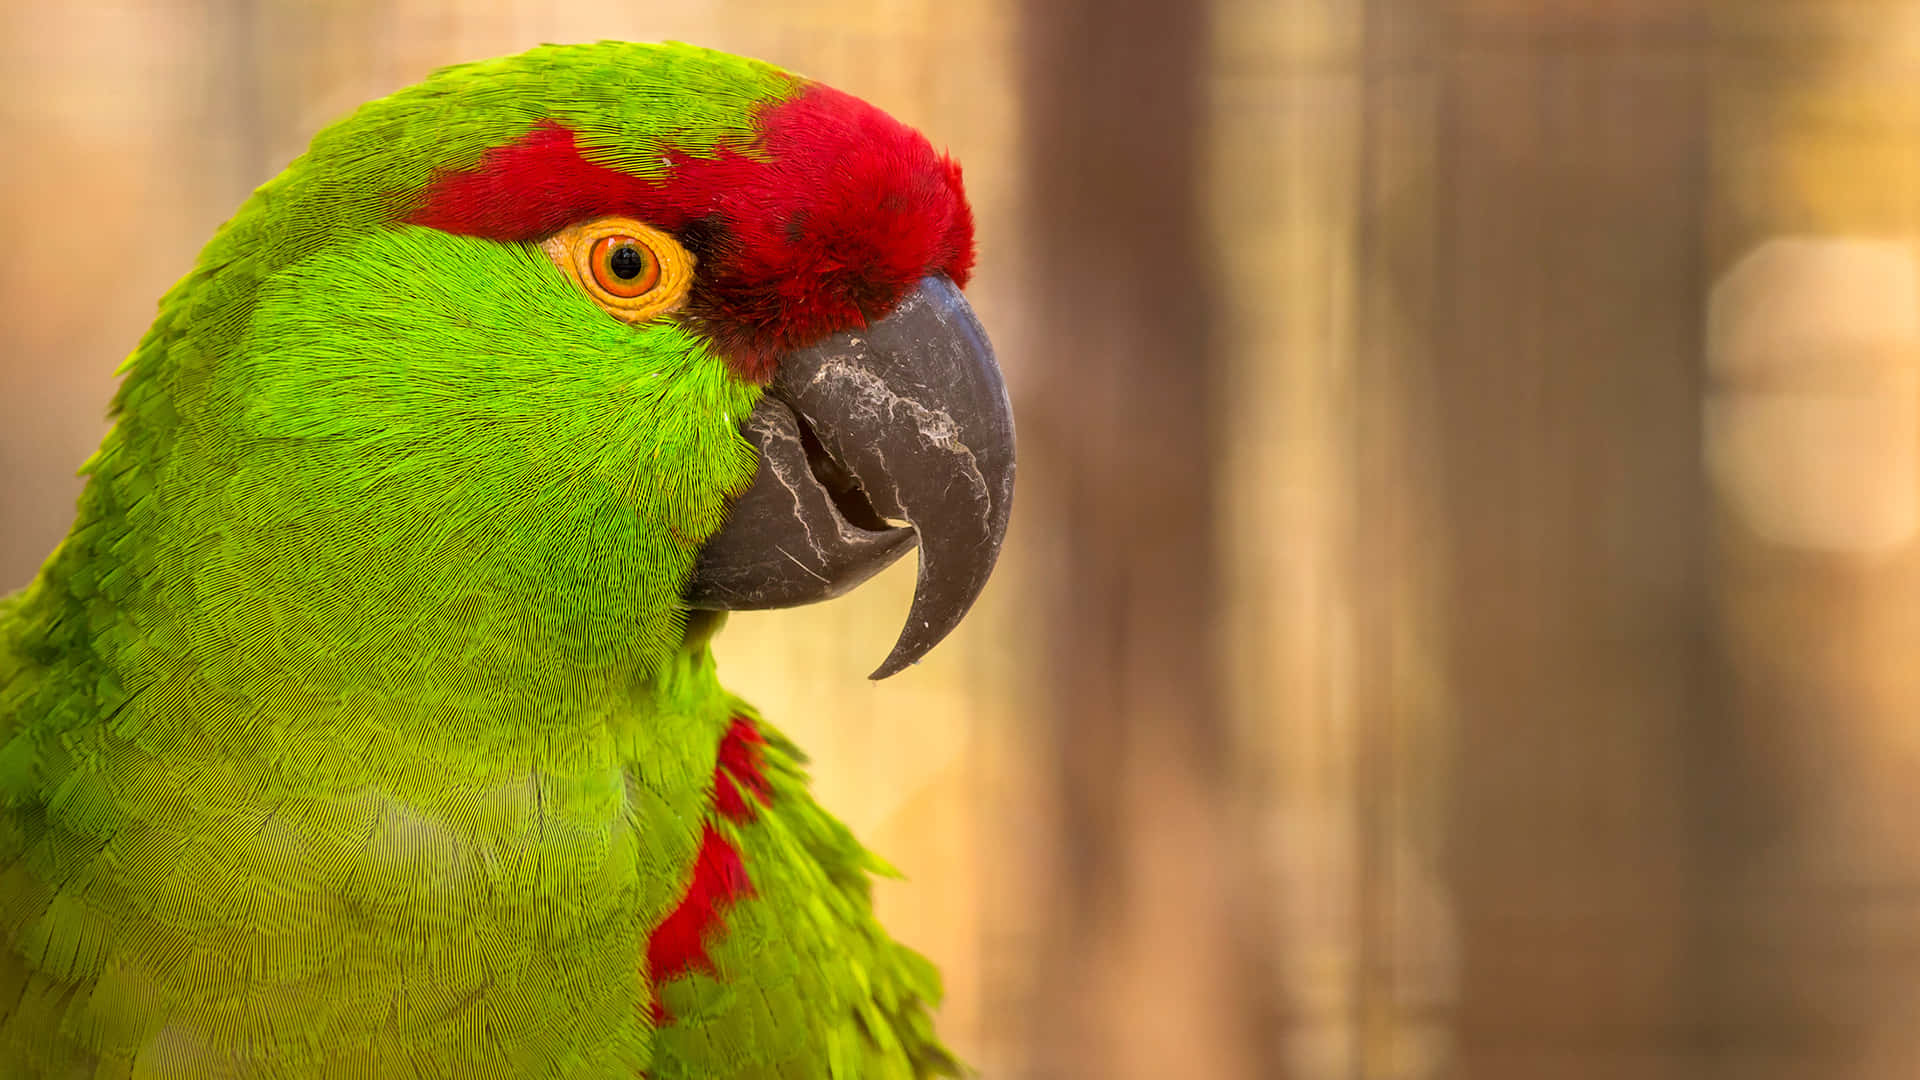 Perched brightly against a blue sky, this parrot is a sight to behold!